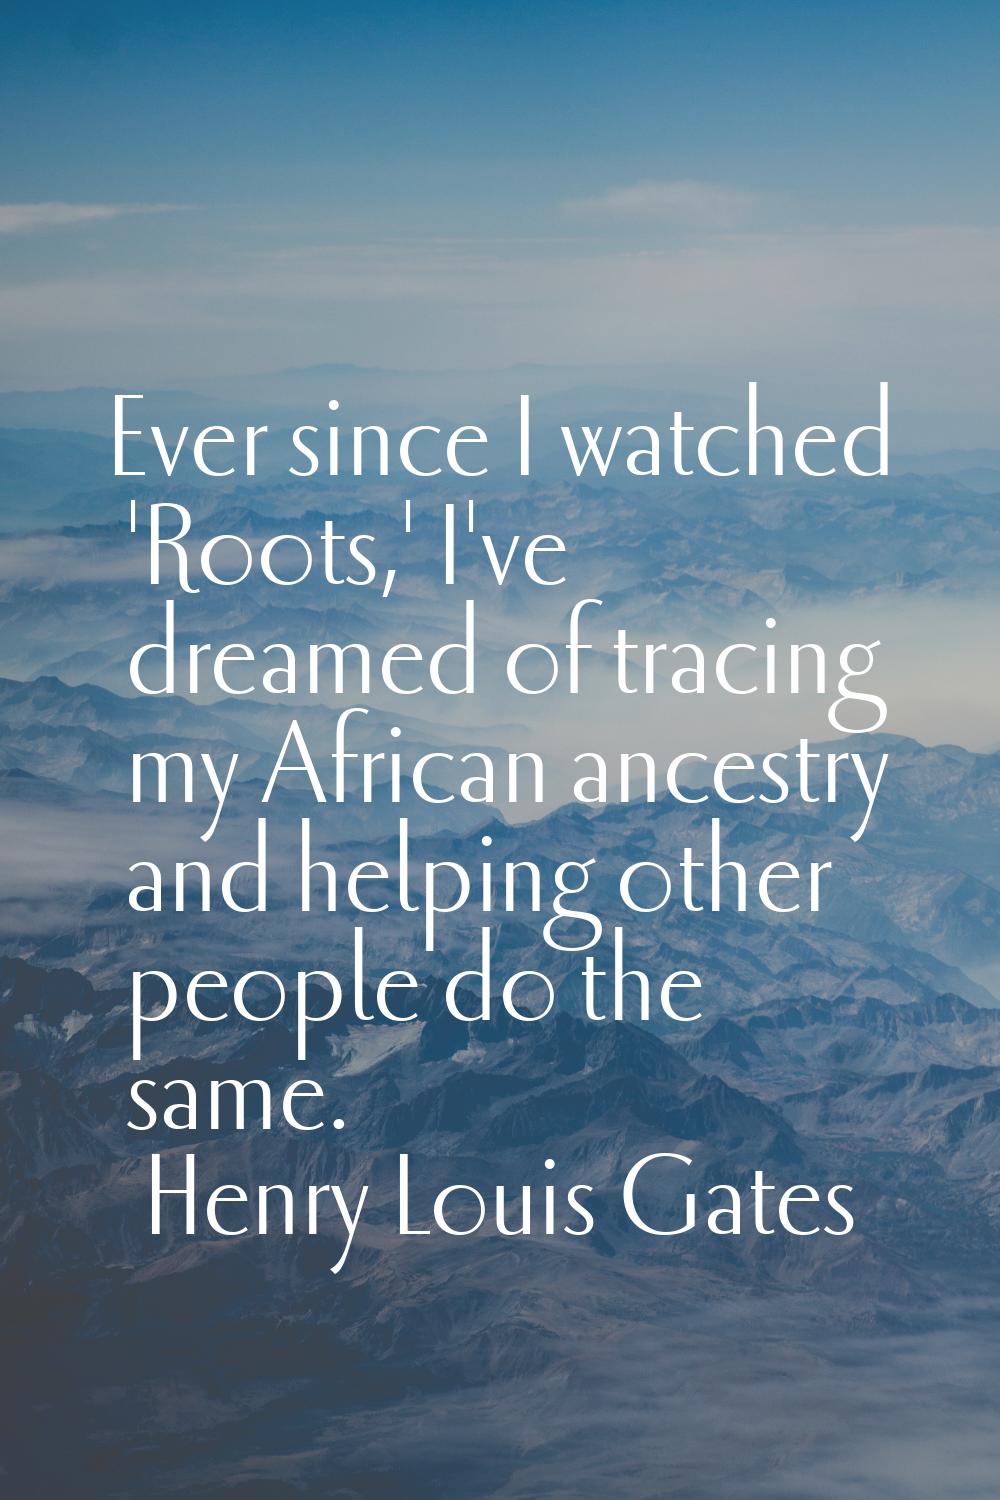 Ever since I watched 'Roots,' I've dreamed of tracing my African ancestry and helping other people 